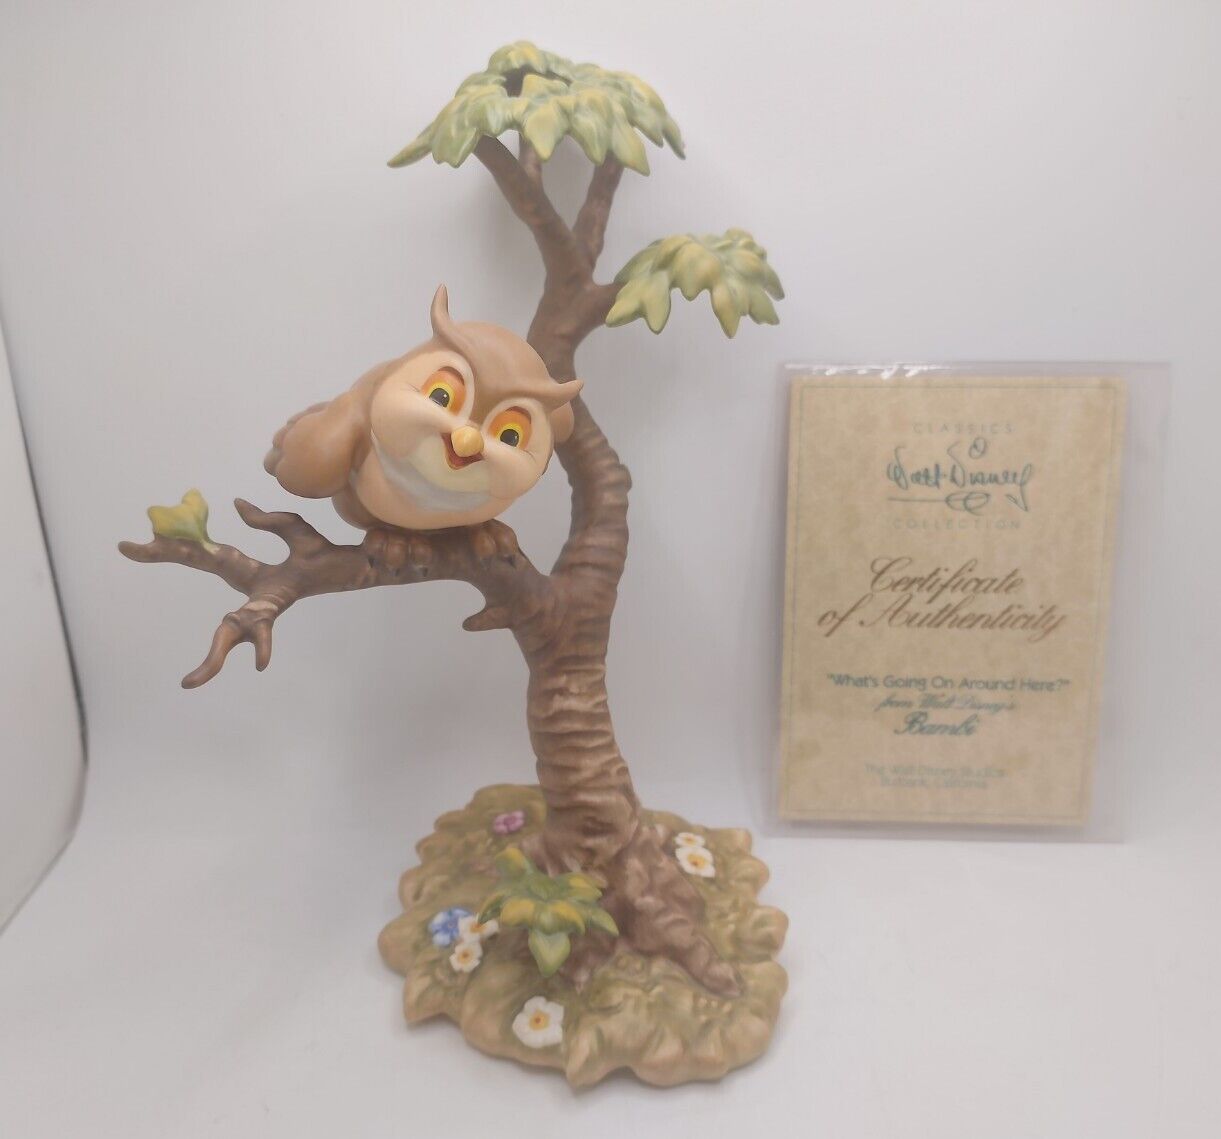 WDCC Friend Owl Bambi What’s Going On Around Here Box COA Vintage 1992 NEW